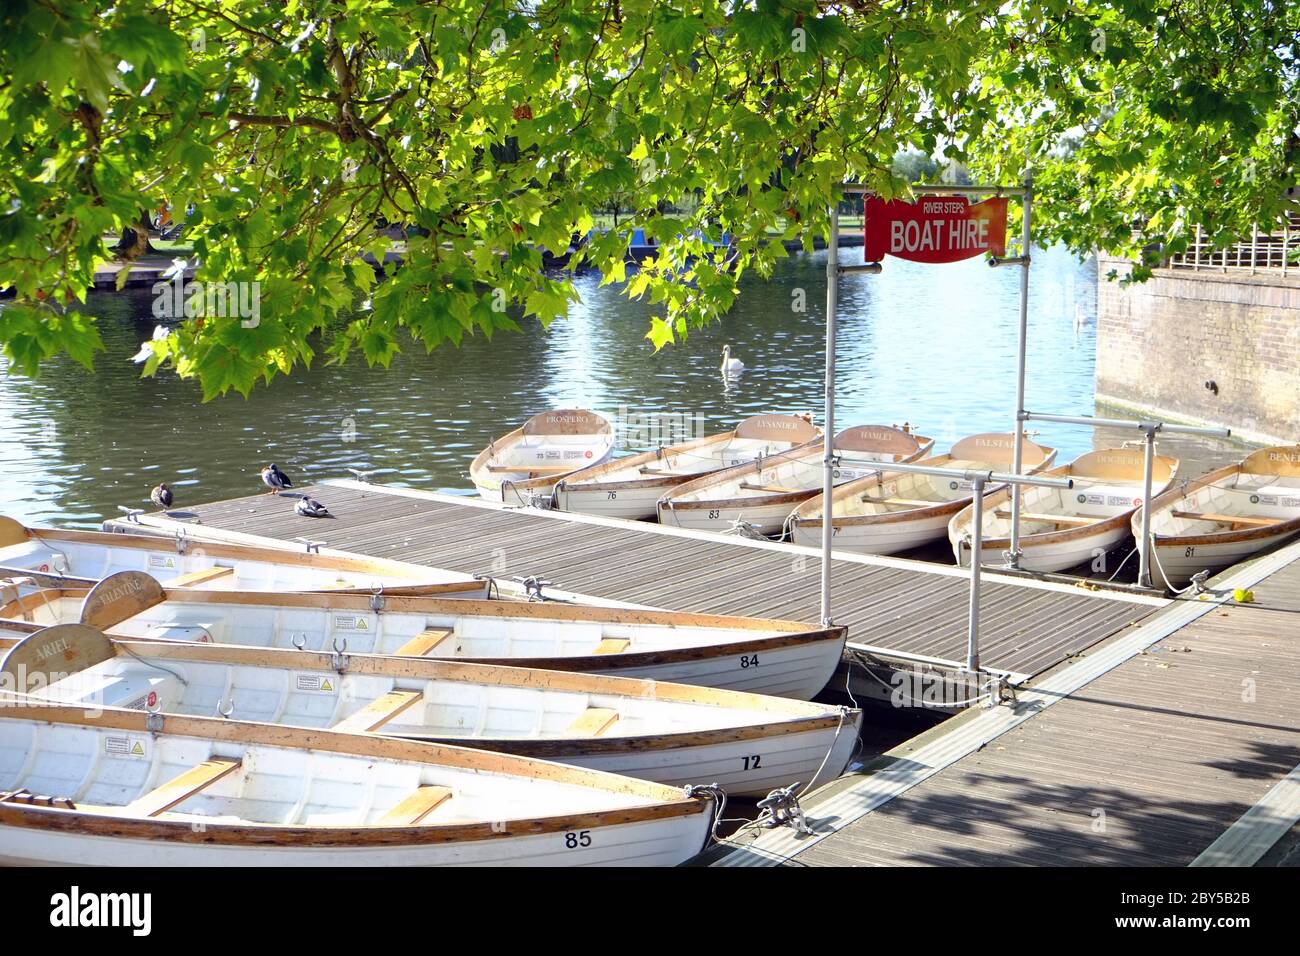 Boat hire at the Royal Shakespeare Theatre Steps, Stratford-upon-Avon, England, UK Stock Photo